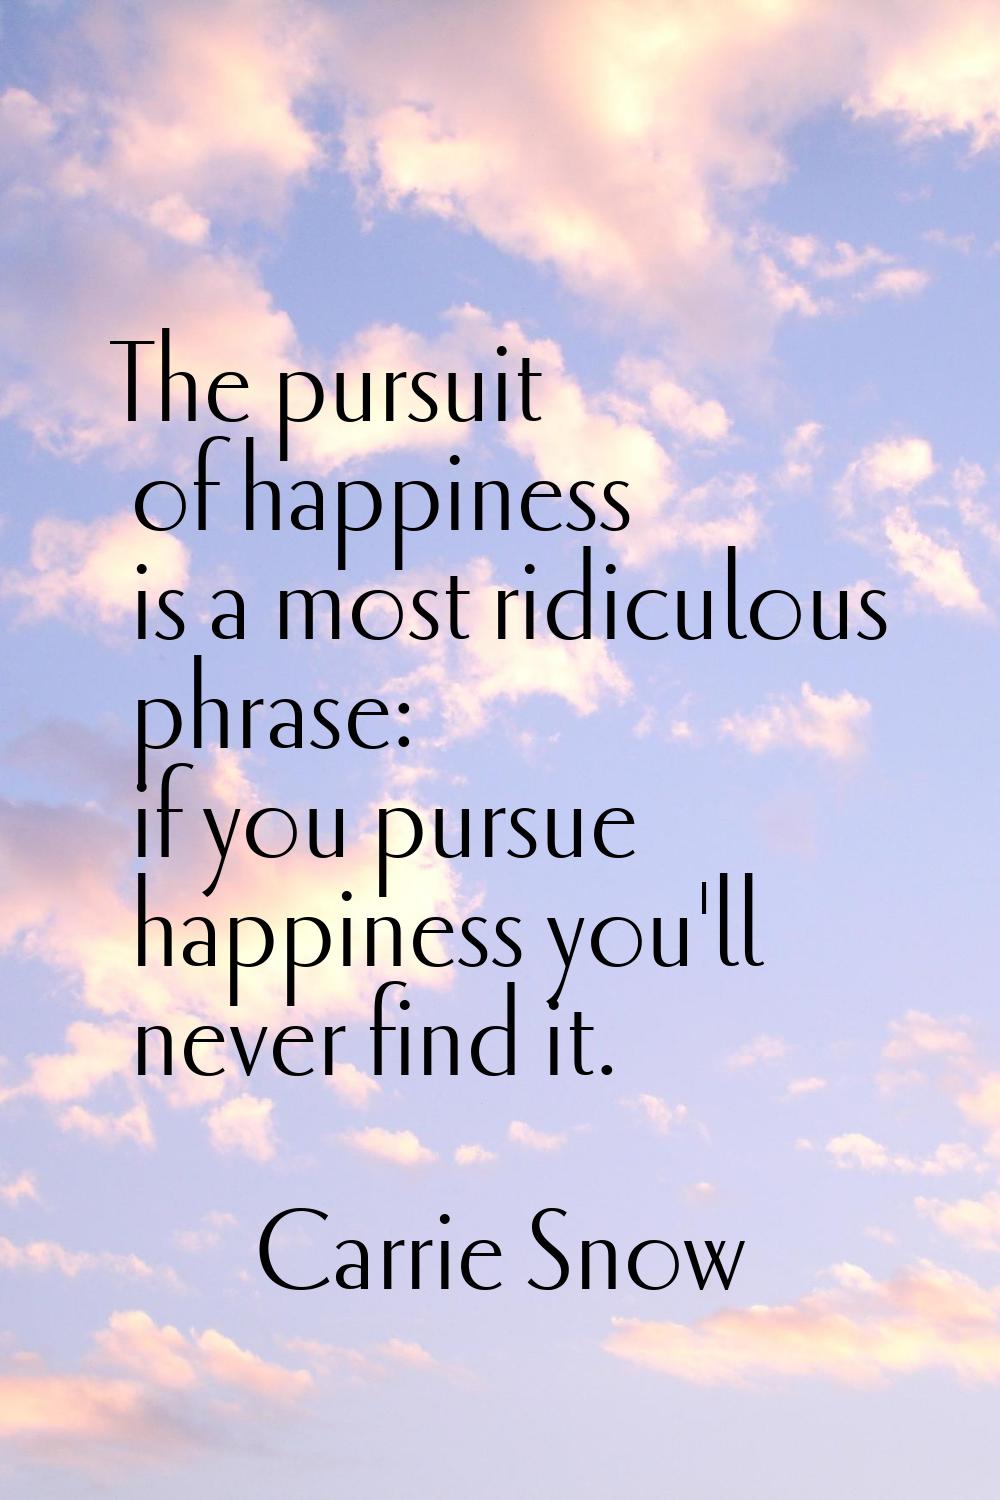 The pursuit of happiness is a most ridiculous phrase: if you pursue happiness you'll never find it.